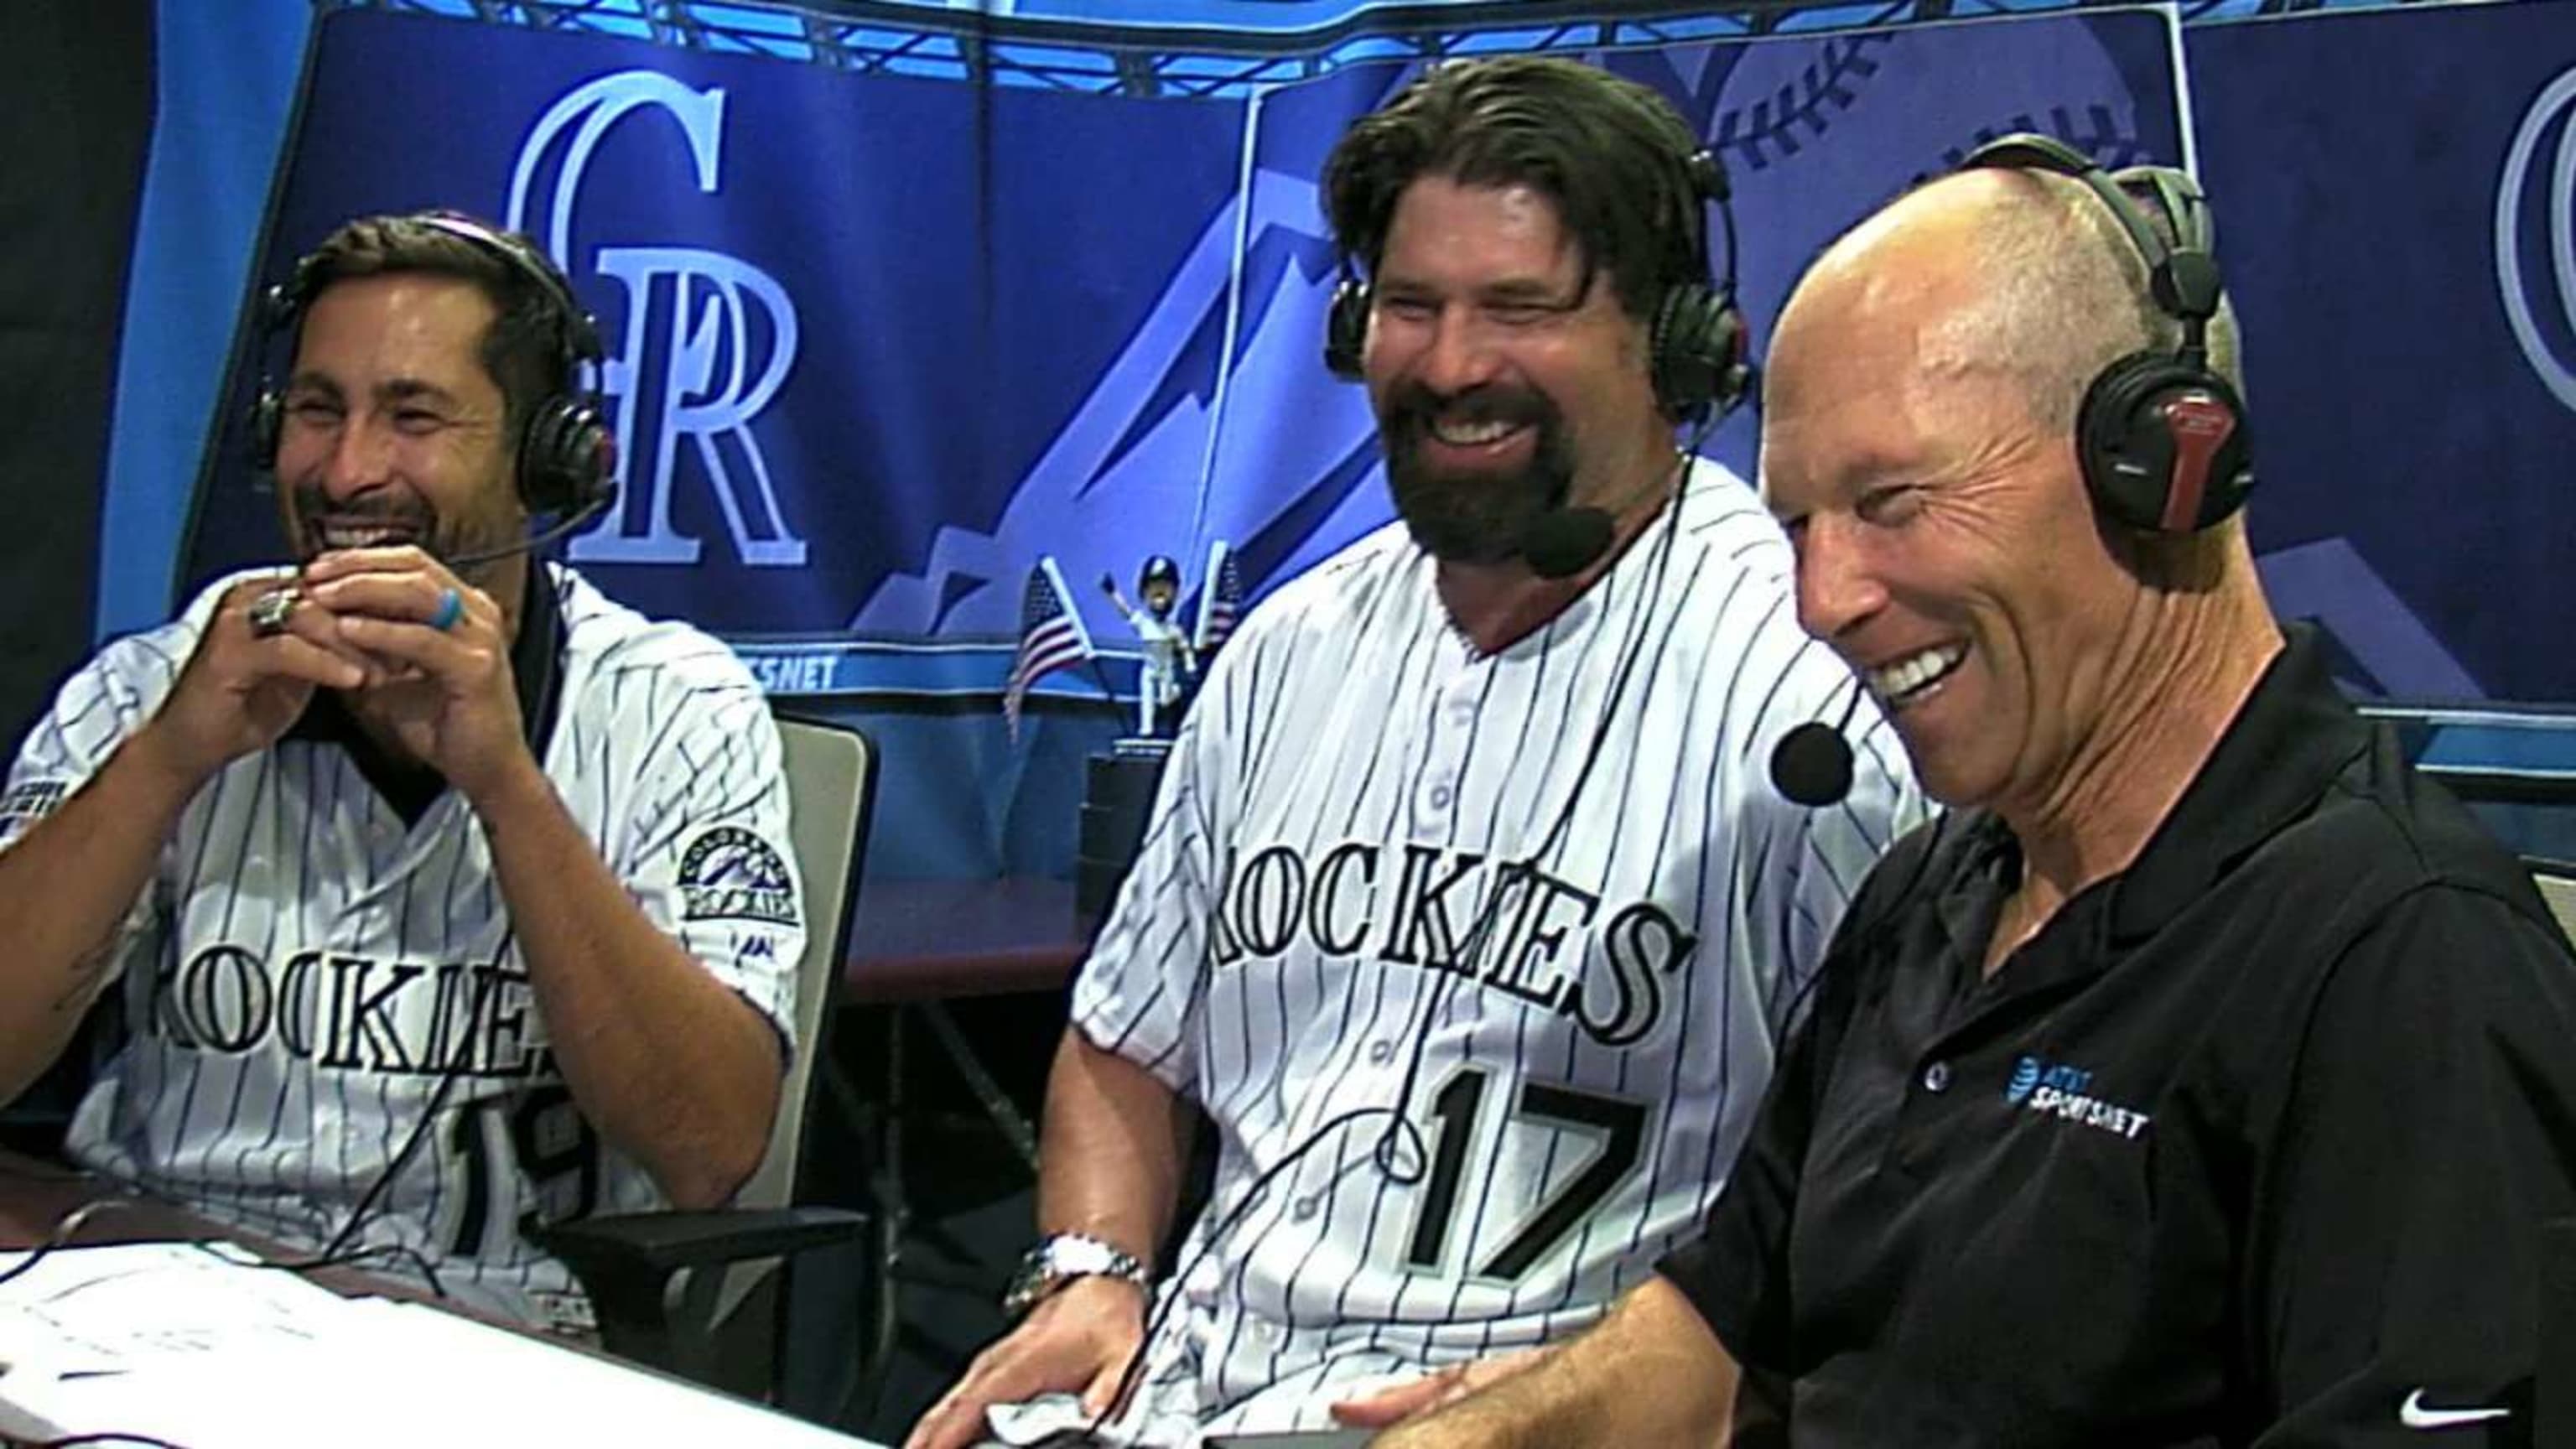 Todd Helton returned to Coors Field for the #RocktoberReunion and